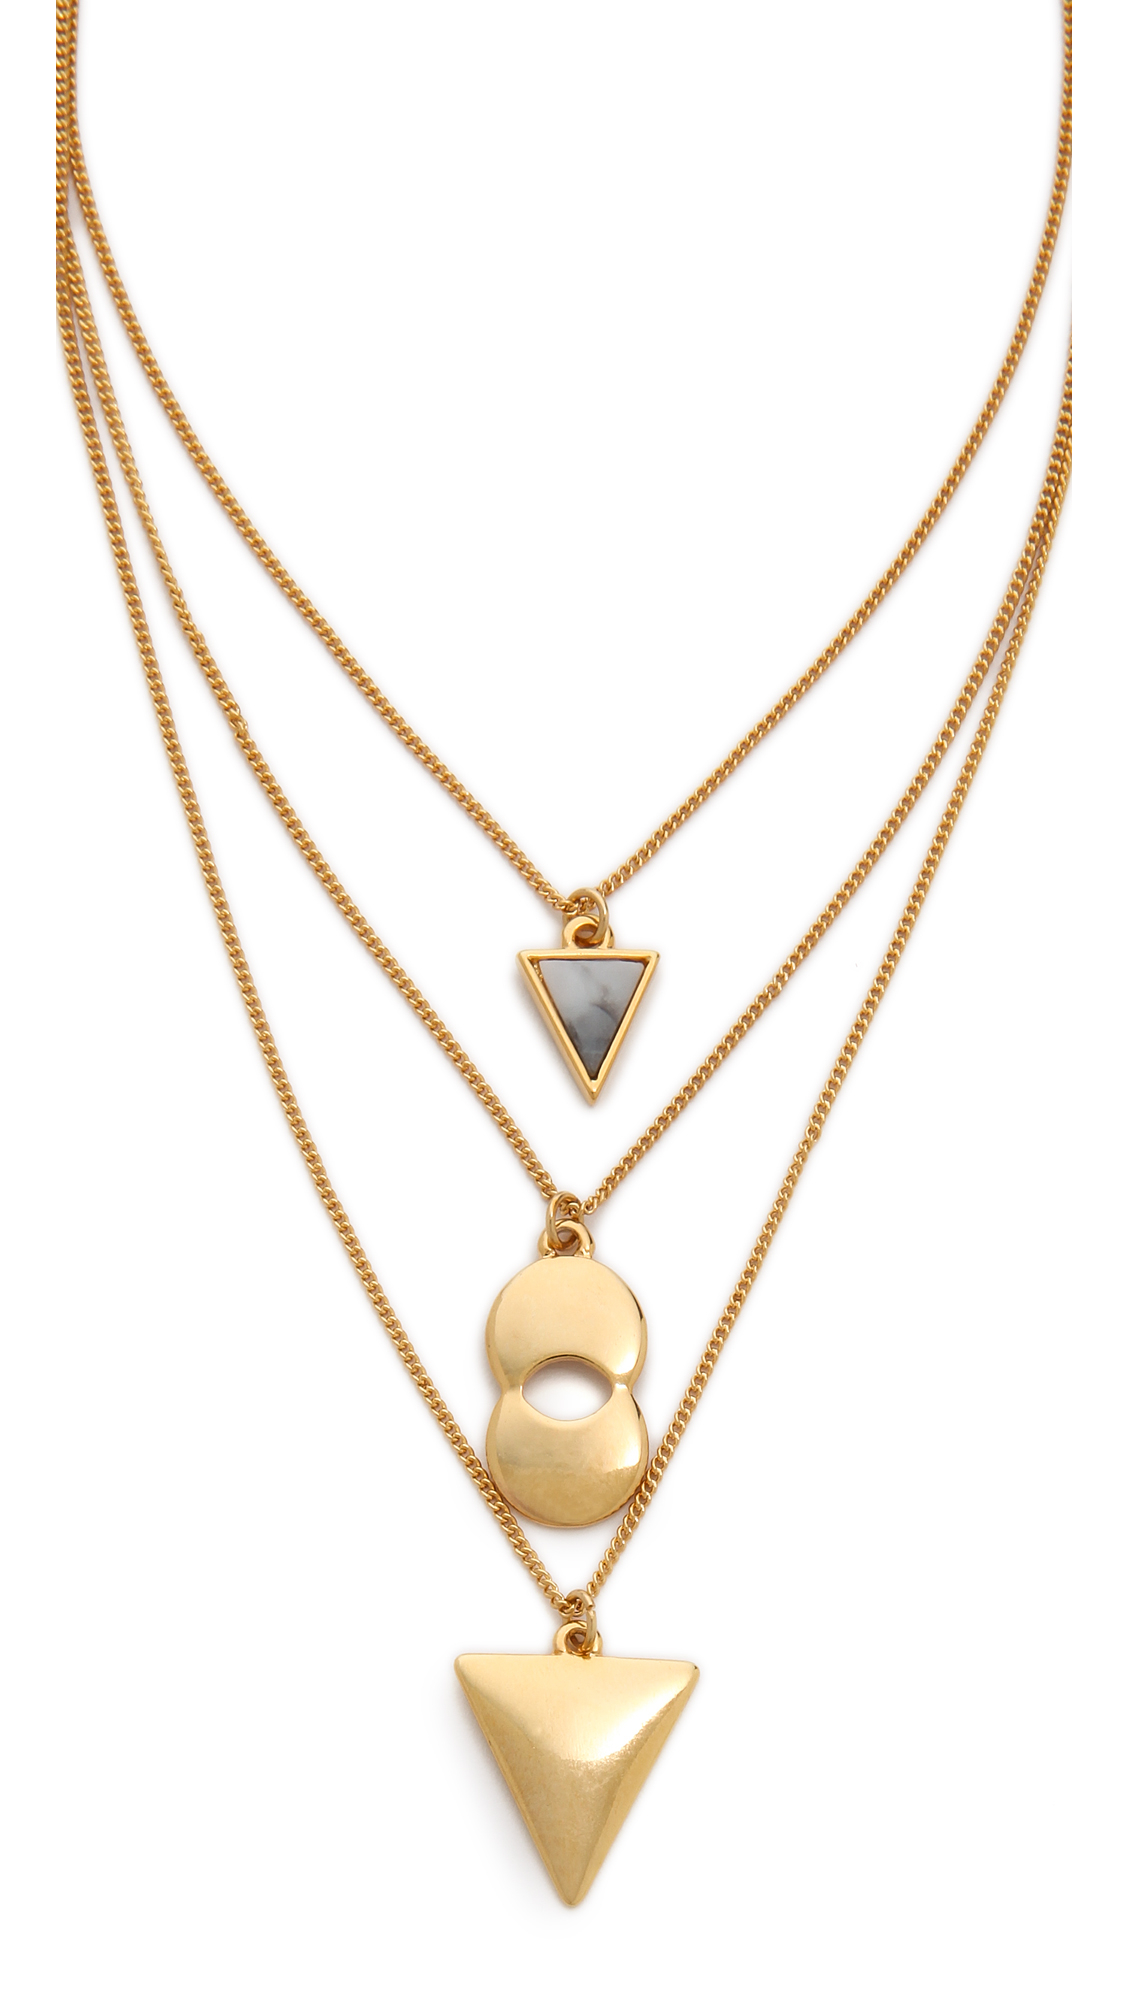 Jules smith Triple Charm Short Necklace in Gold (Gold Multi) | Lyst